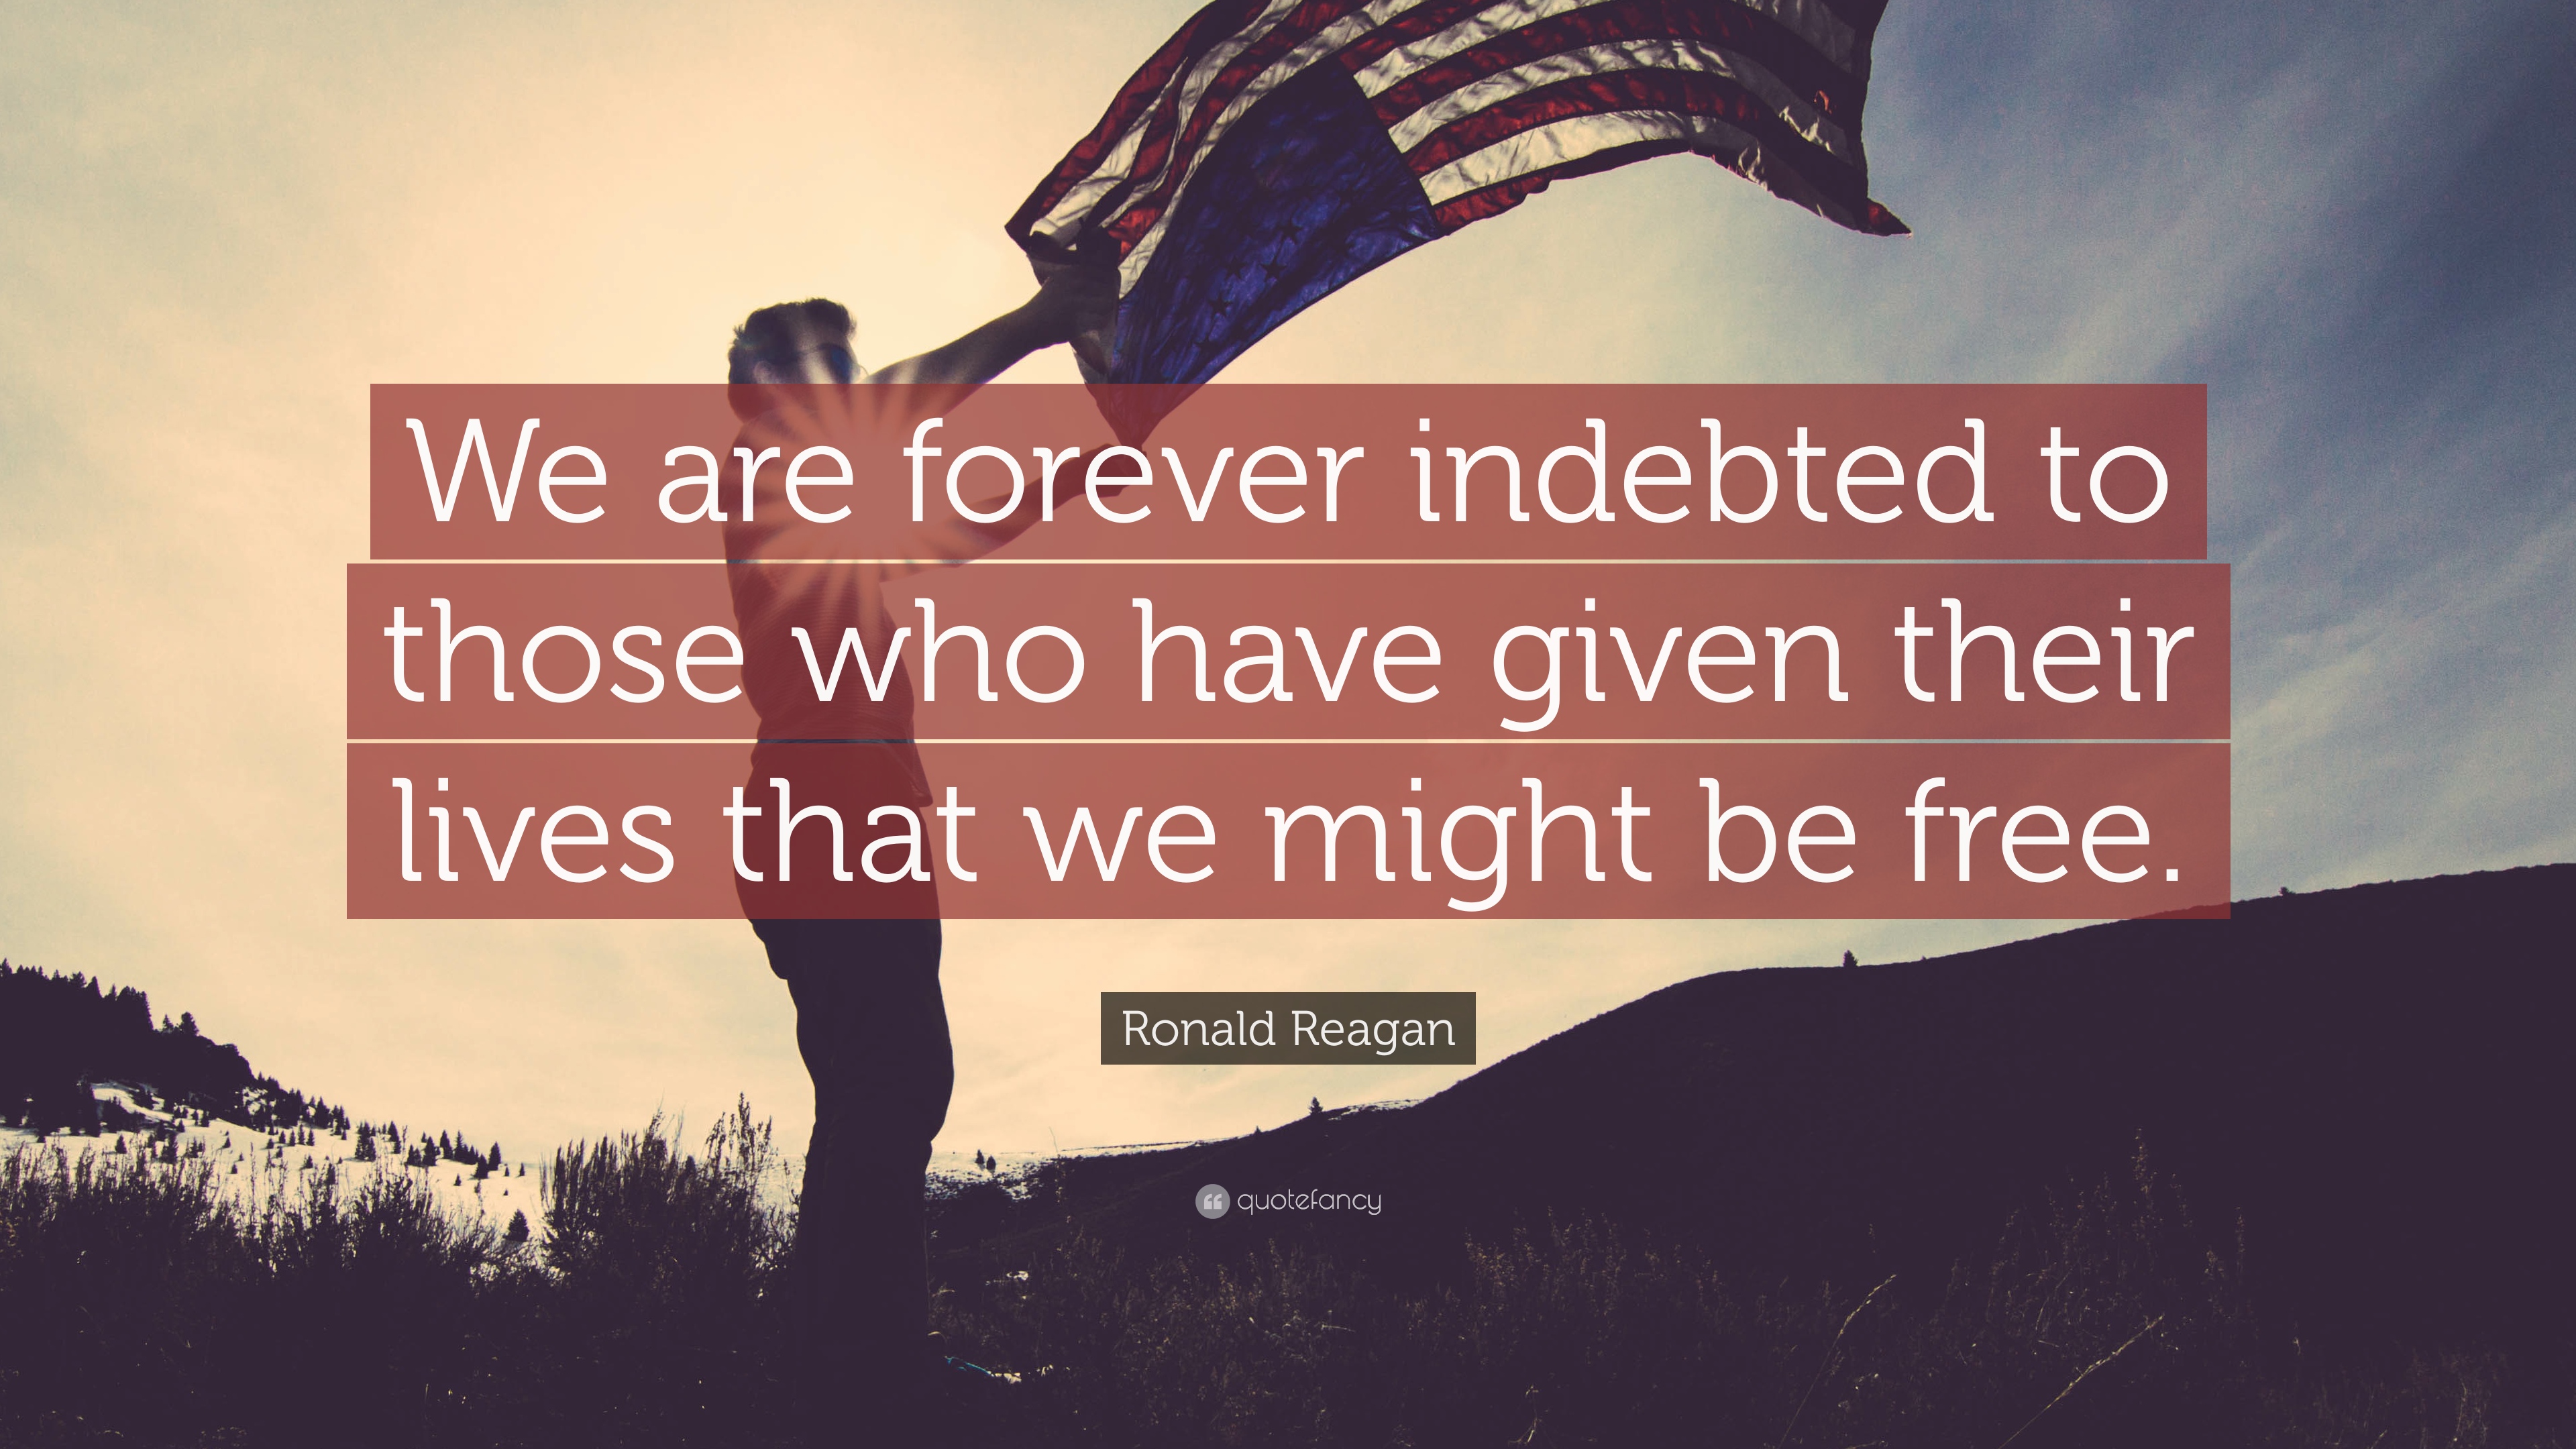 Ronald Reagan Quote: “We are forever indebted to those who have